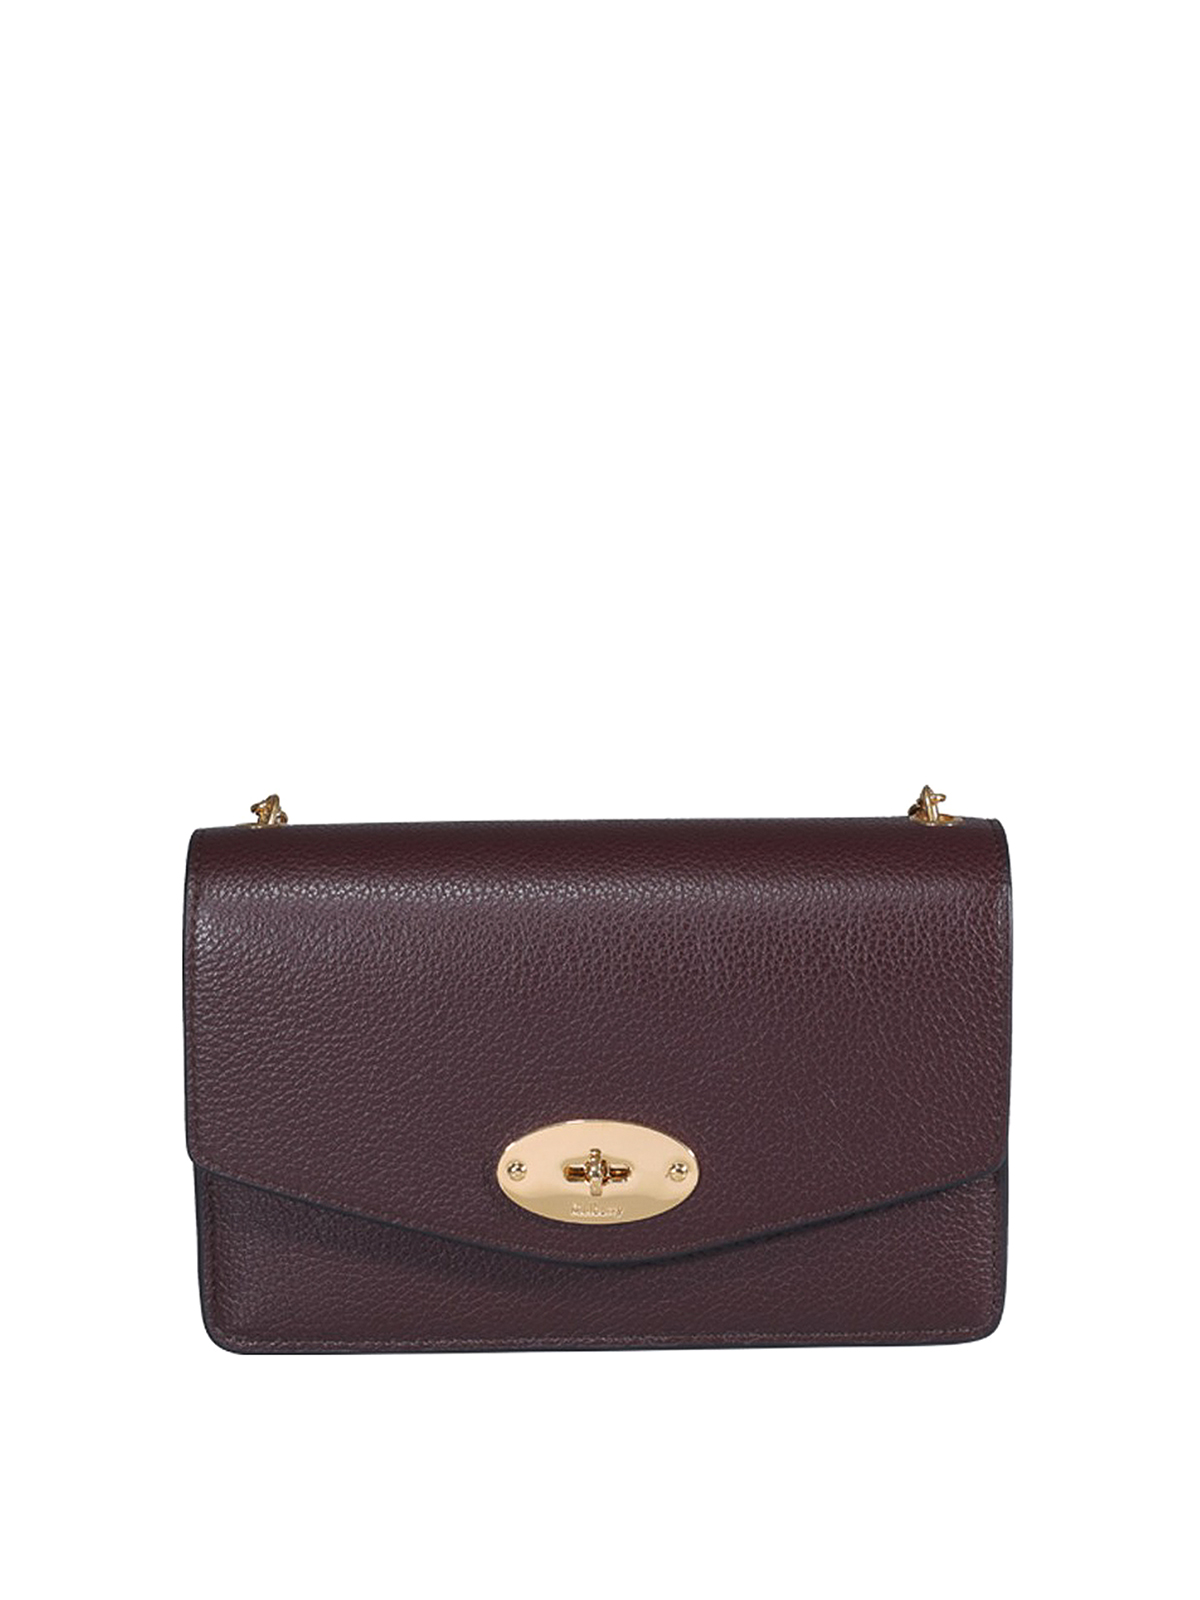 Mulberry Leather Clutch In Burgundy